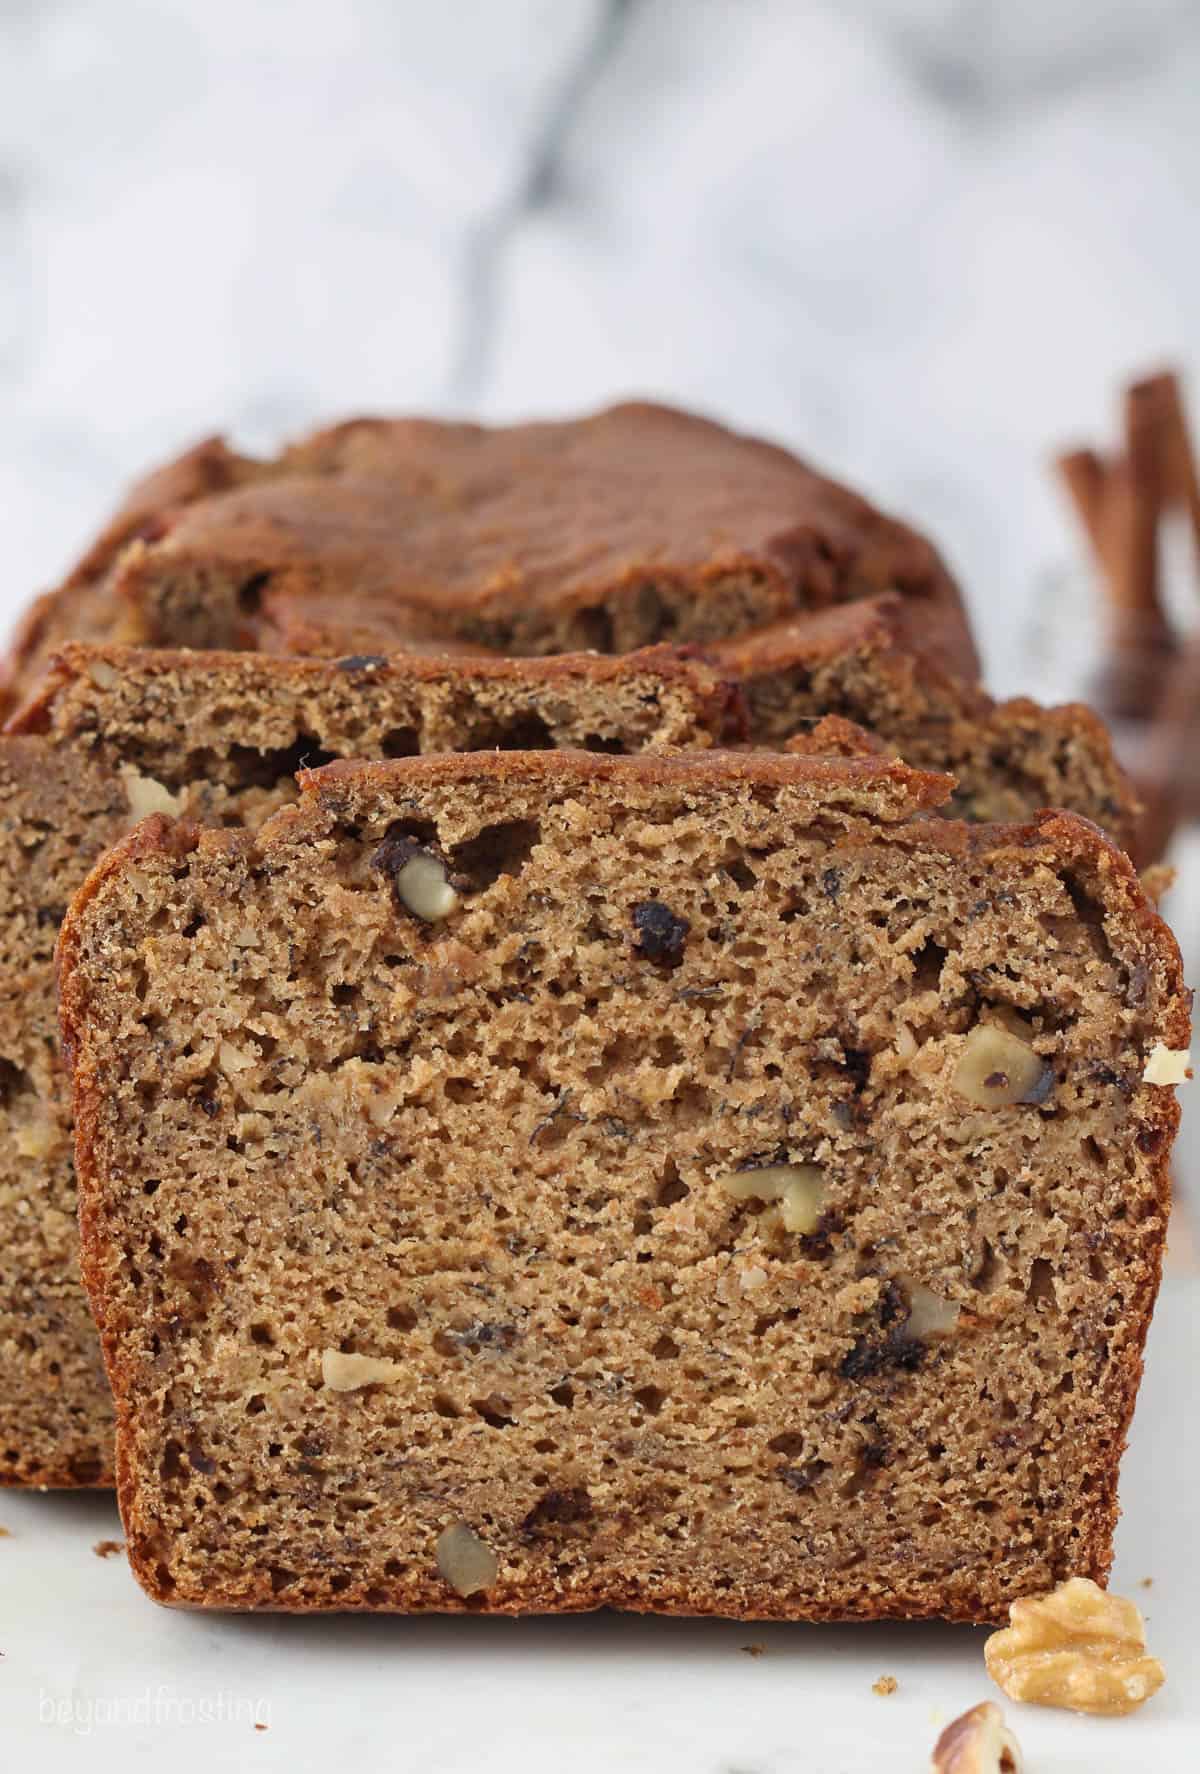 Front view of a slice of banana bread